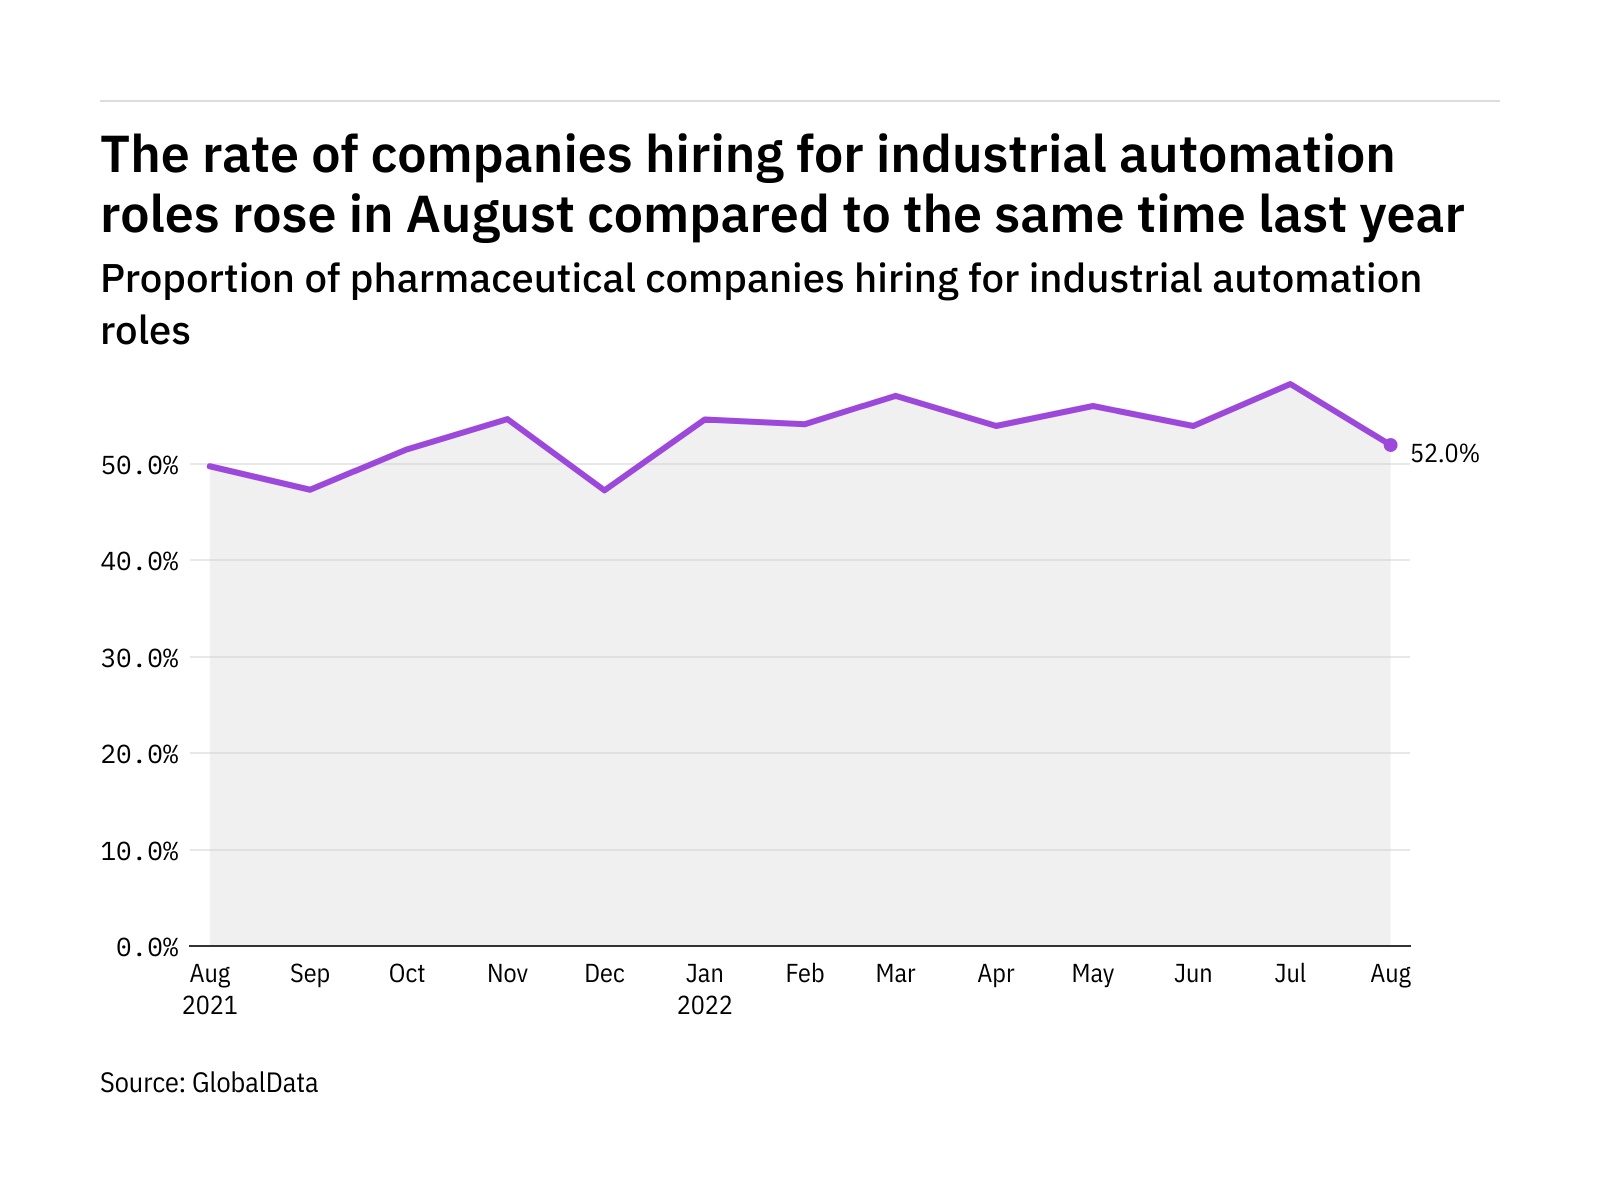 Industrial automation hiring levels in  pharma rose in August 2022